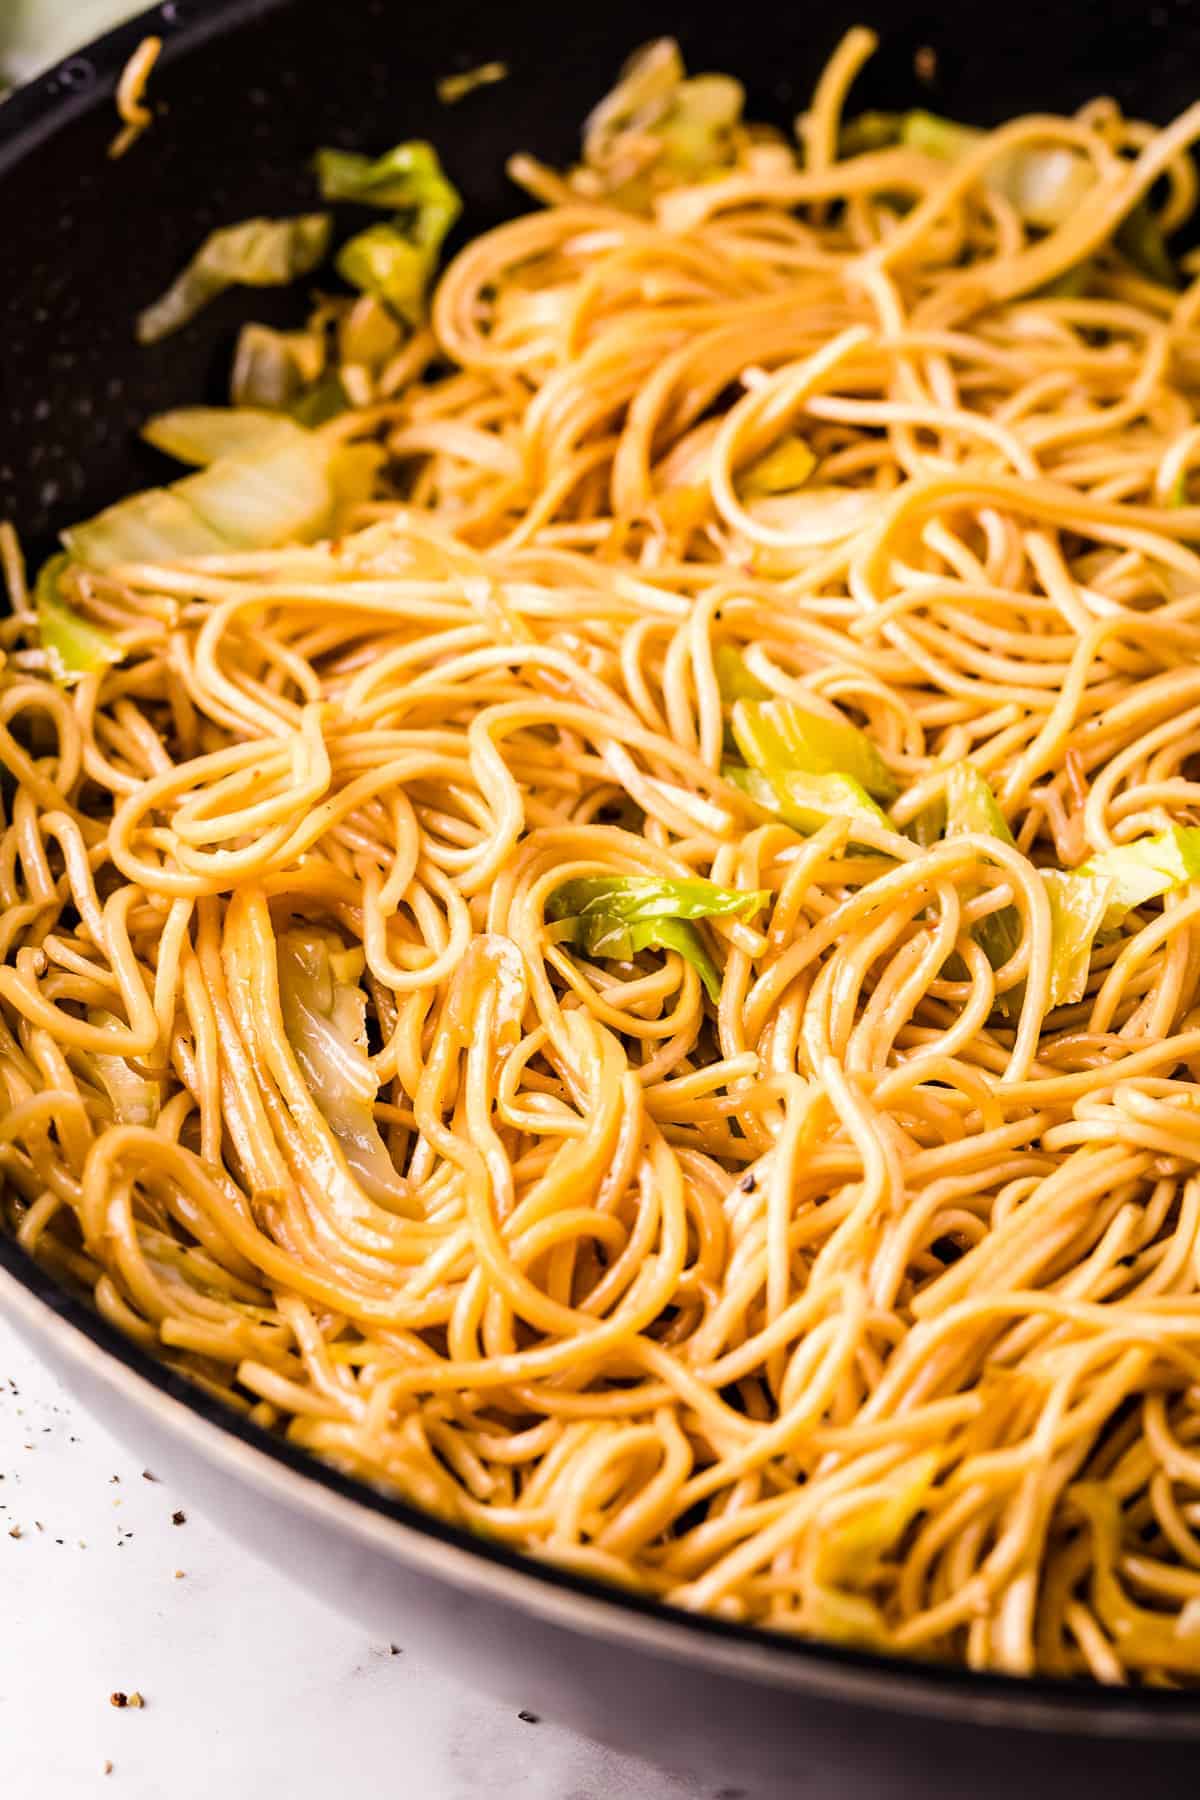 Skillet with chow mein in it